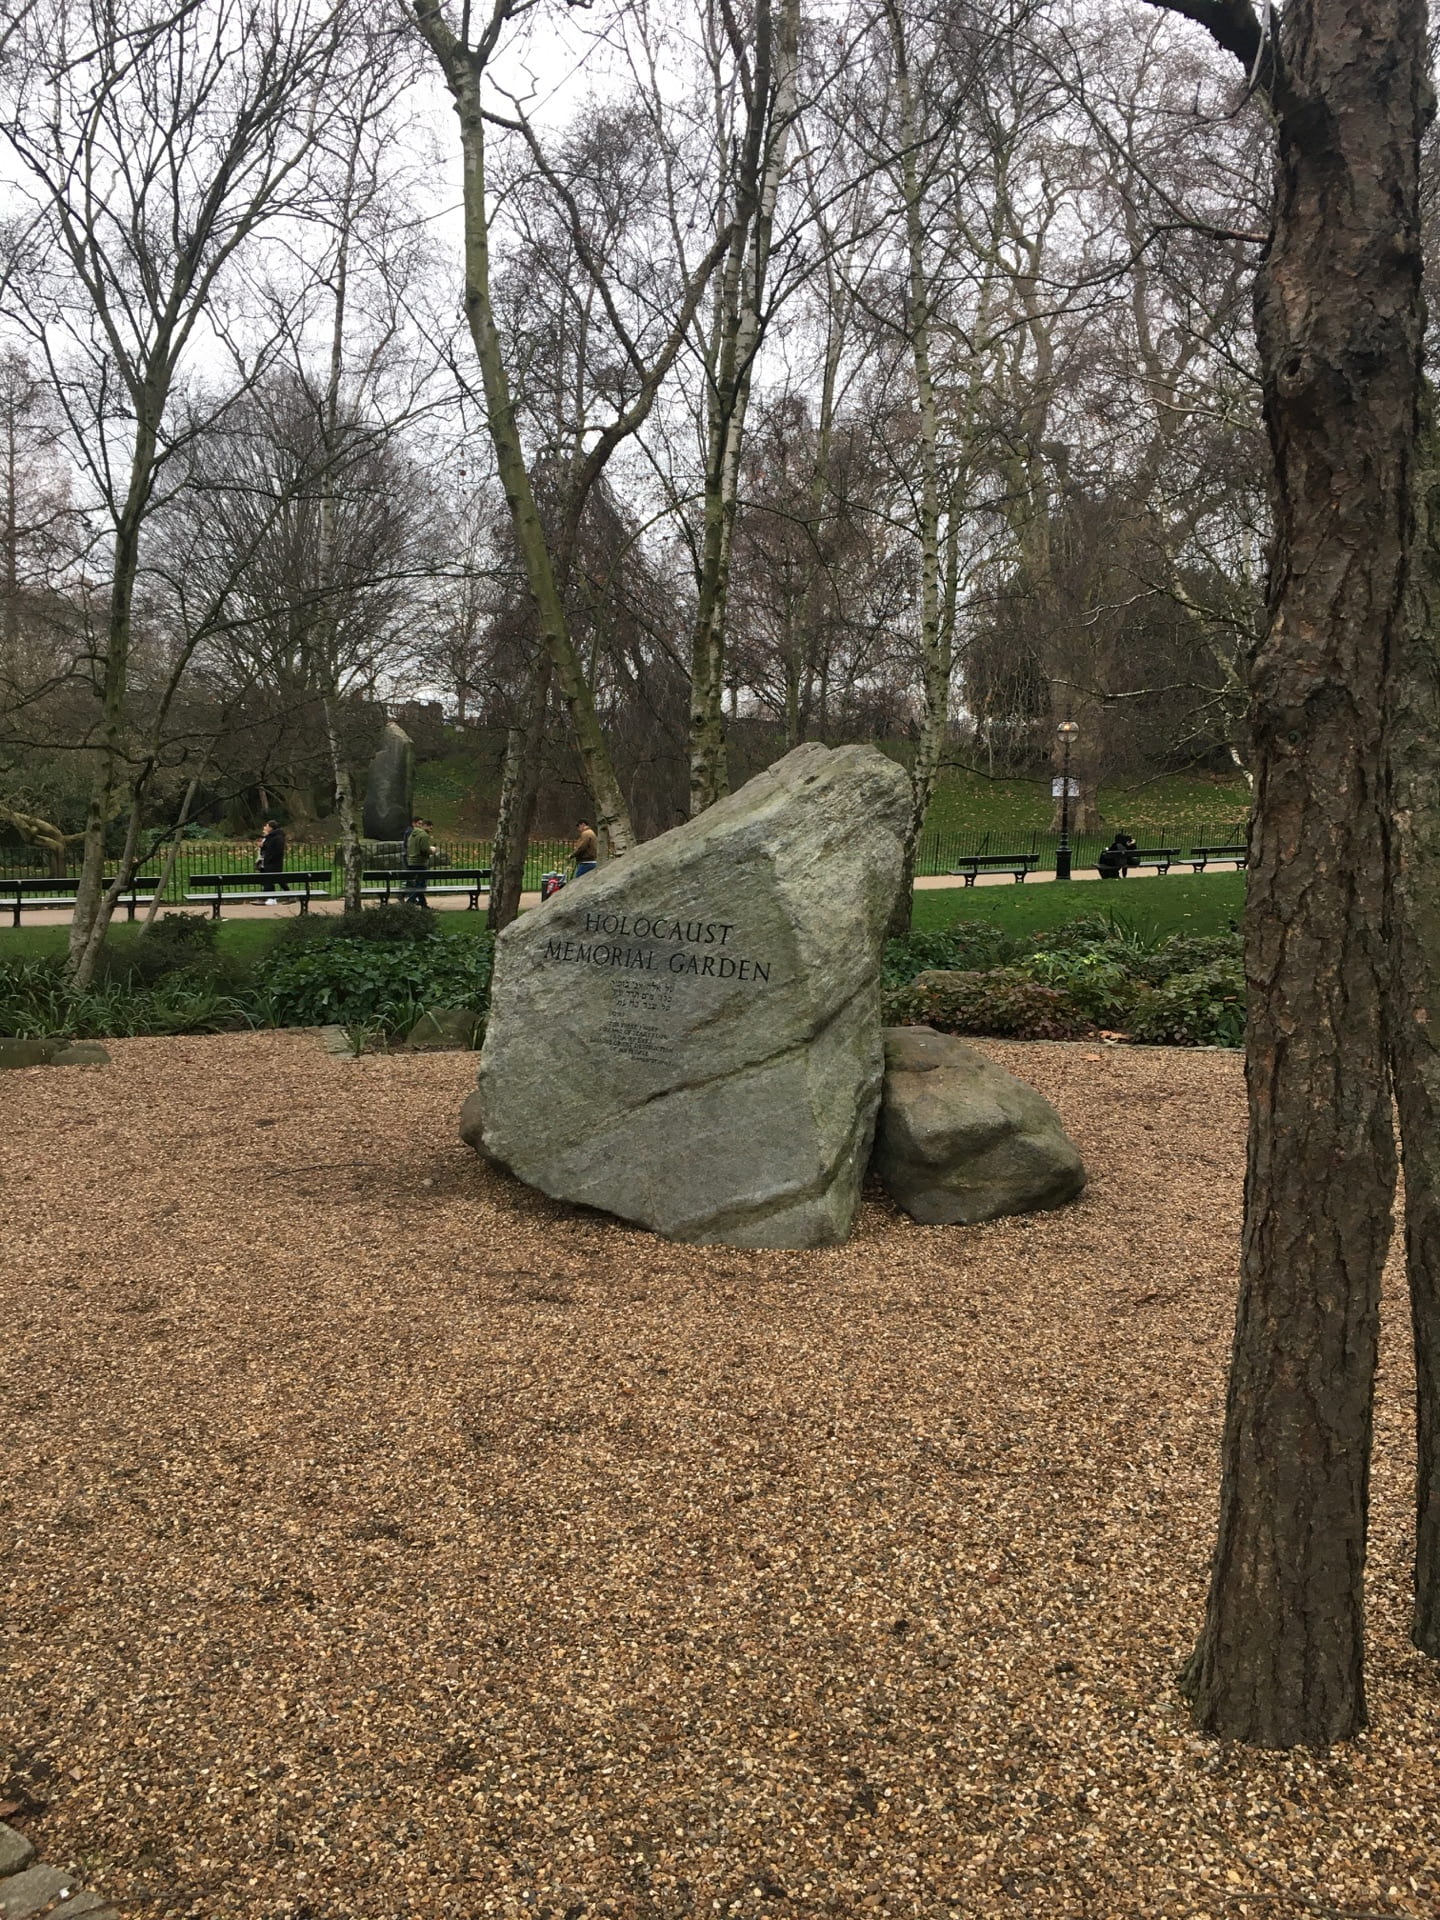 A picture of the Holocaust memorial garden in Hyde Park